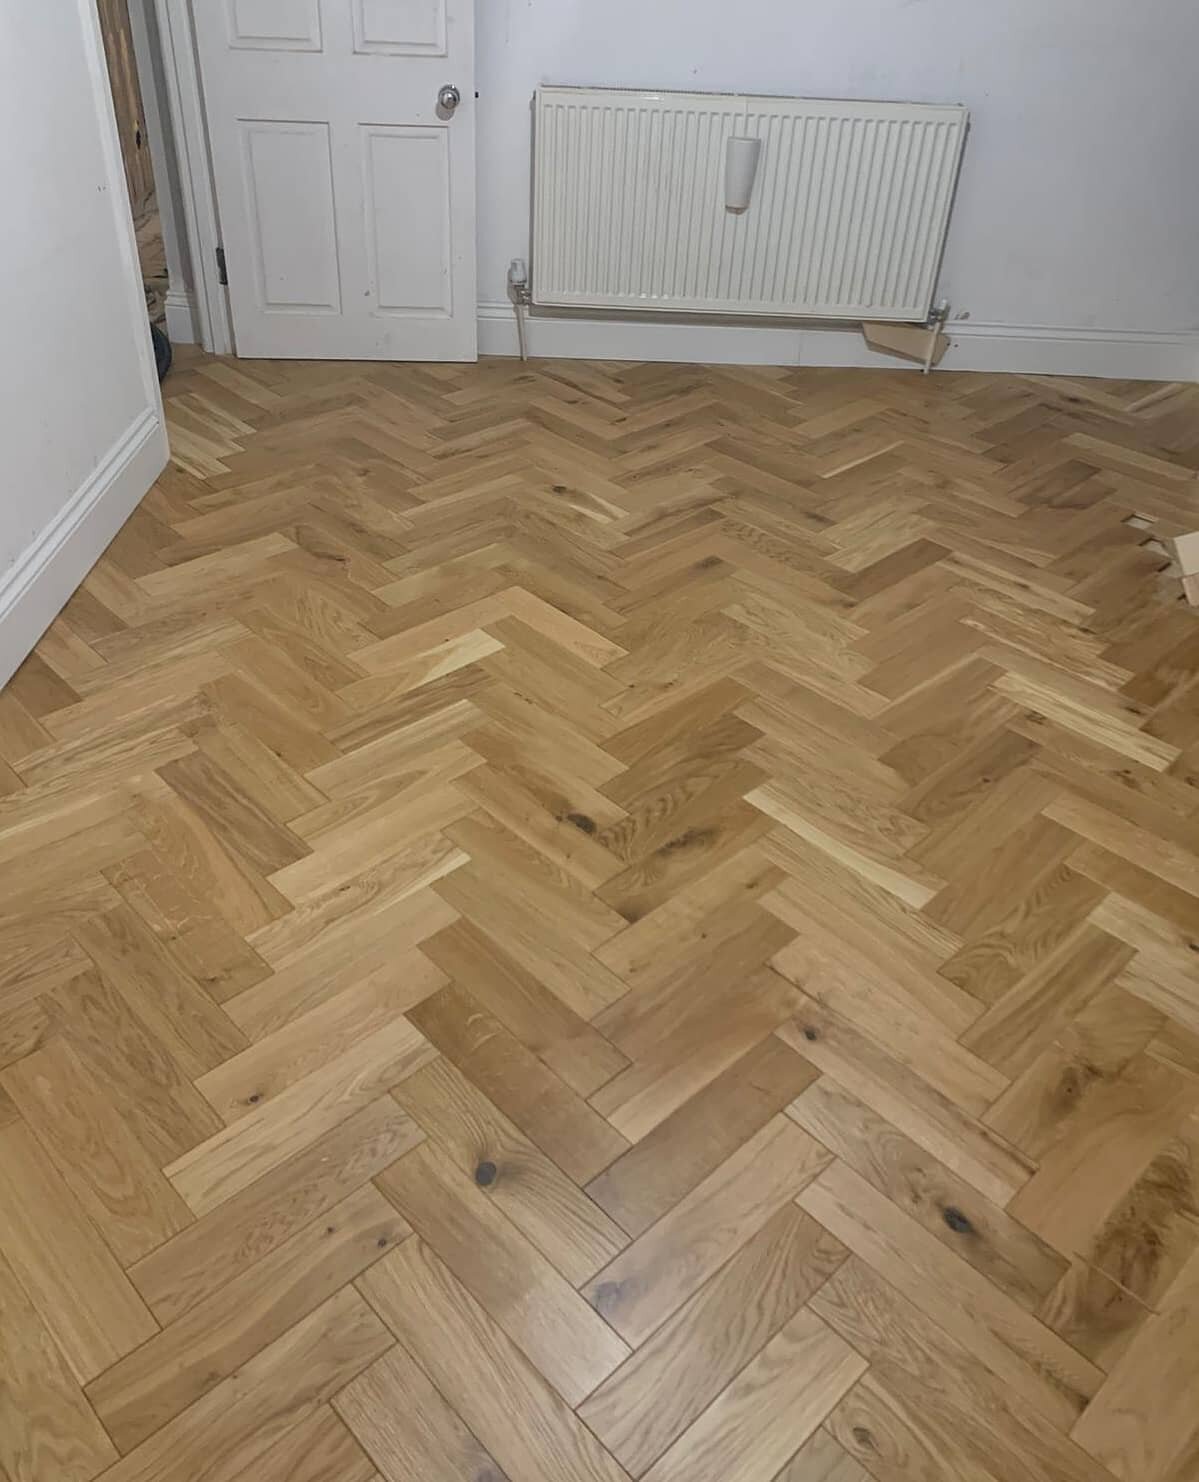 Recent Parquet fitting for a very happy residential customer 🏠

*Natural Oak Finish*

Our fitters are very experienced and come highly reccomended!! ✅

Get your free quote today! Call us on 07798748297 or 0208 687 6820

#v4woodflooring #wimbledonvil